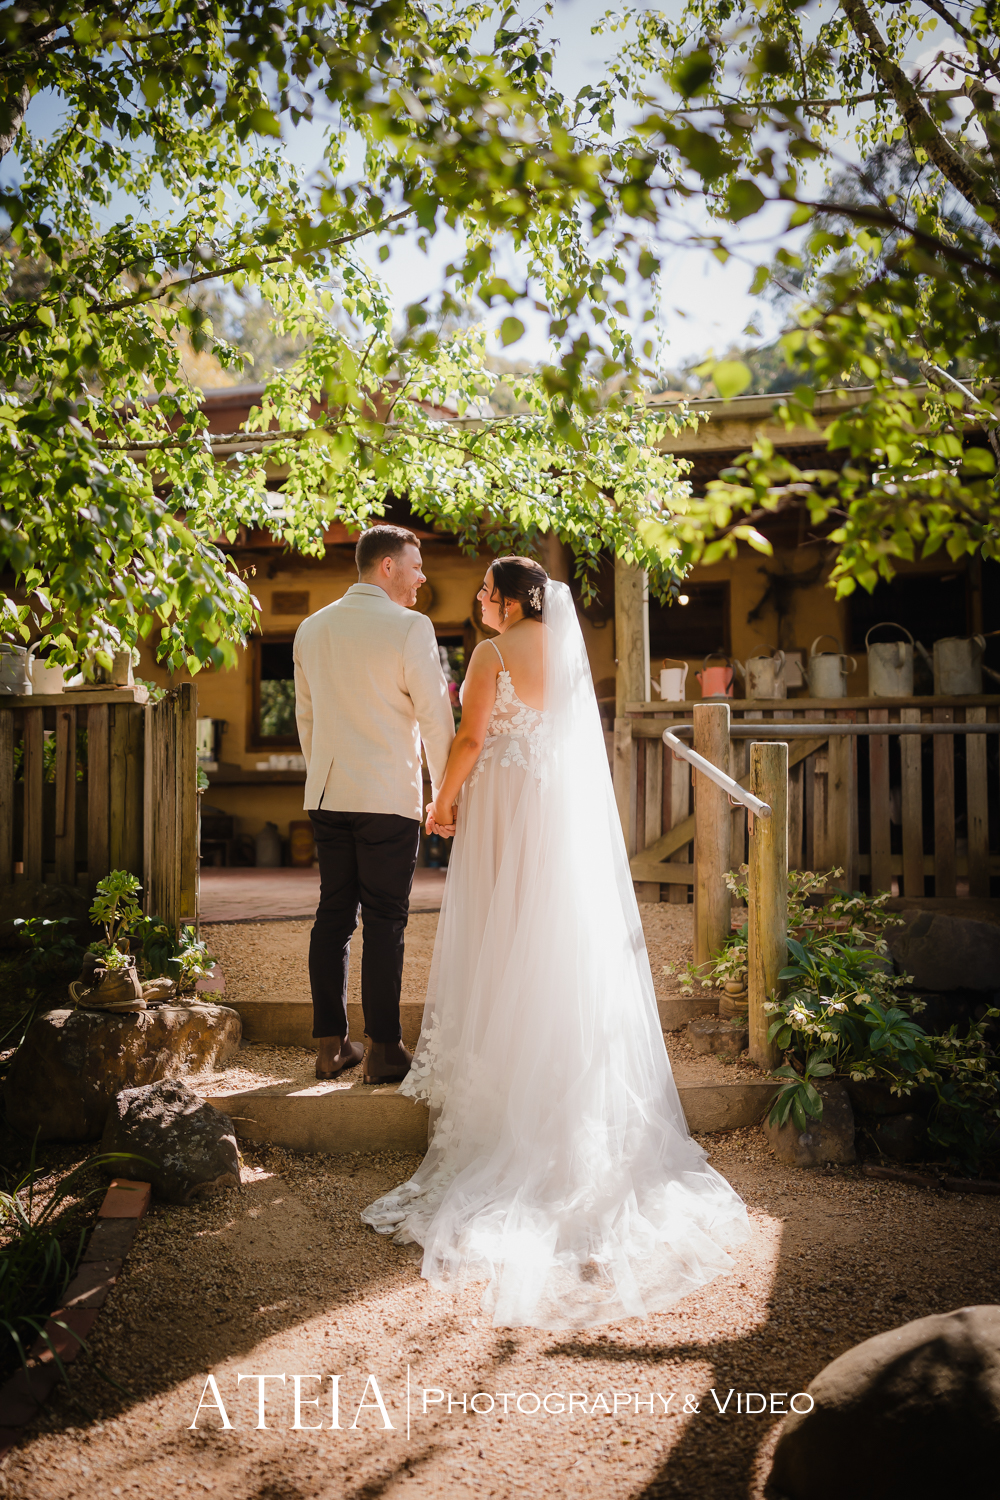 , Hayley and Sean&#8217;s wedding photography at Gum Gully Farm captured by ATEIA Photography &#038; Video